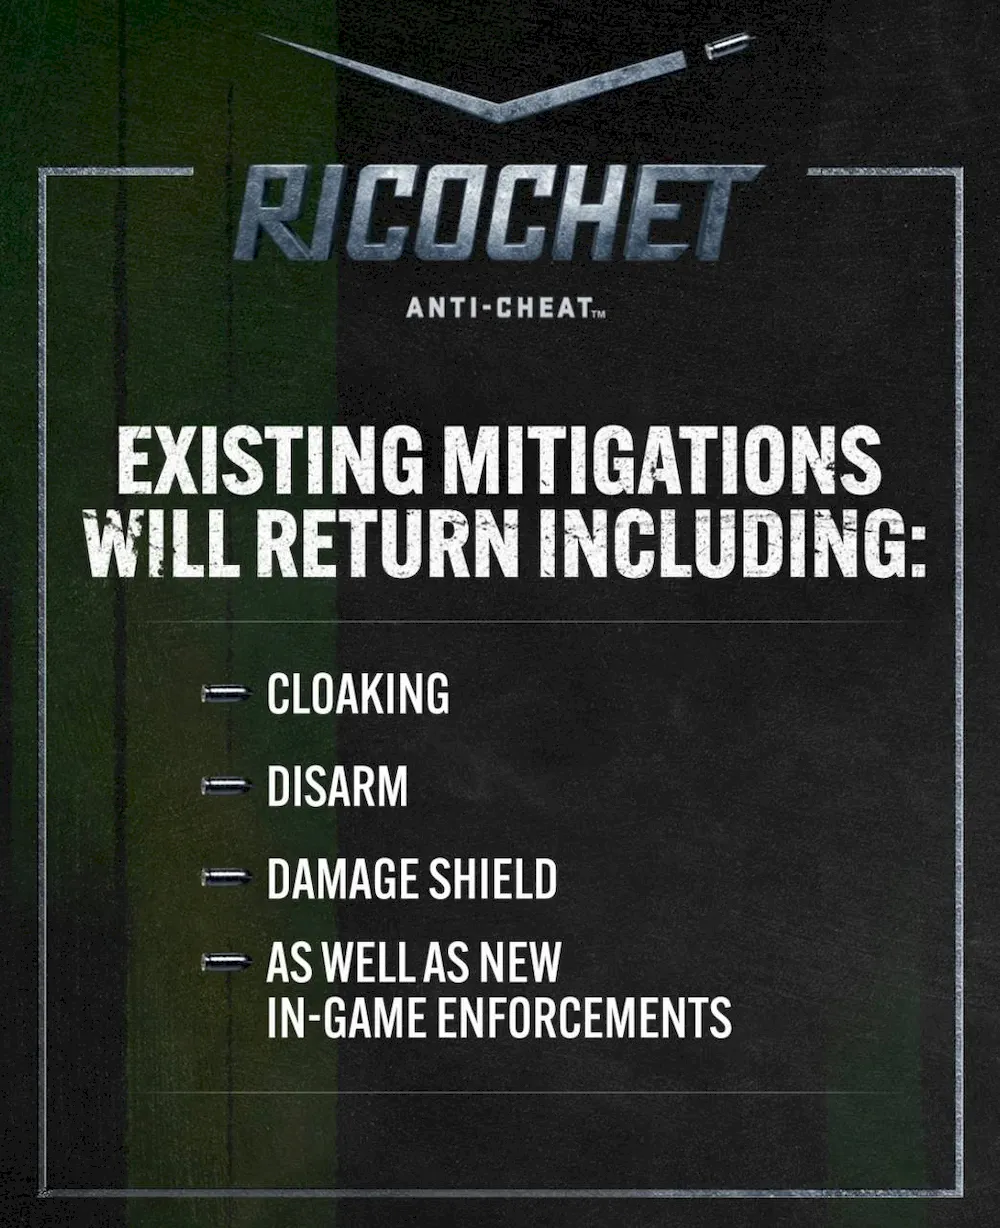 What about Ricochet? How does the anticheat work now? - photo №62248